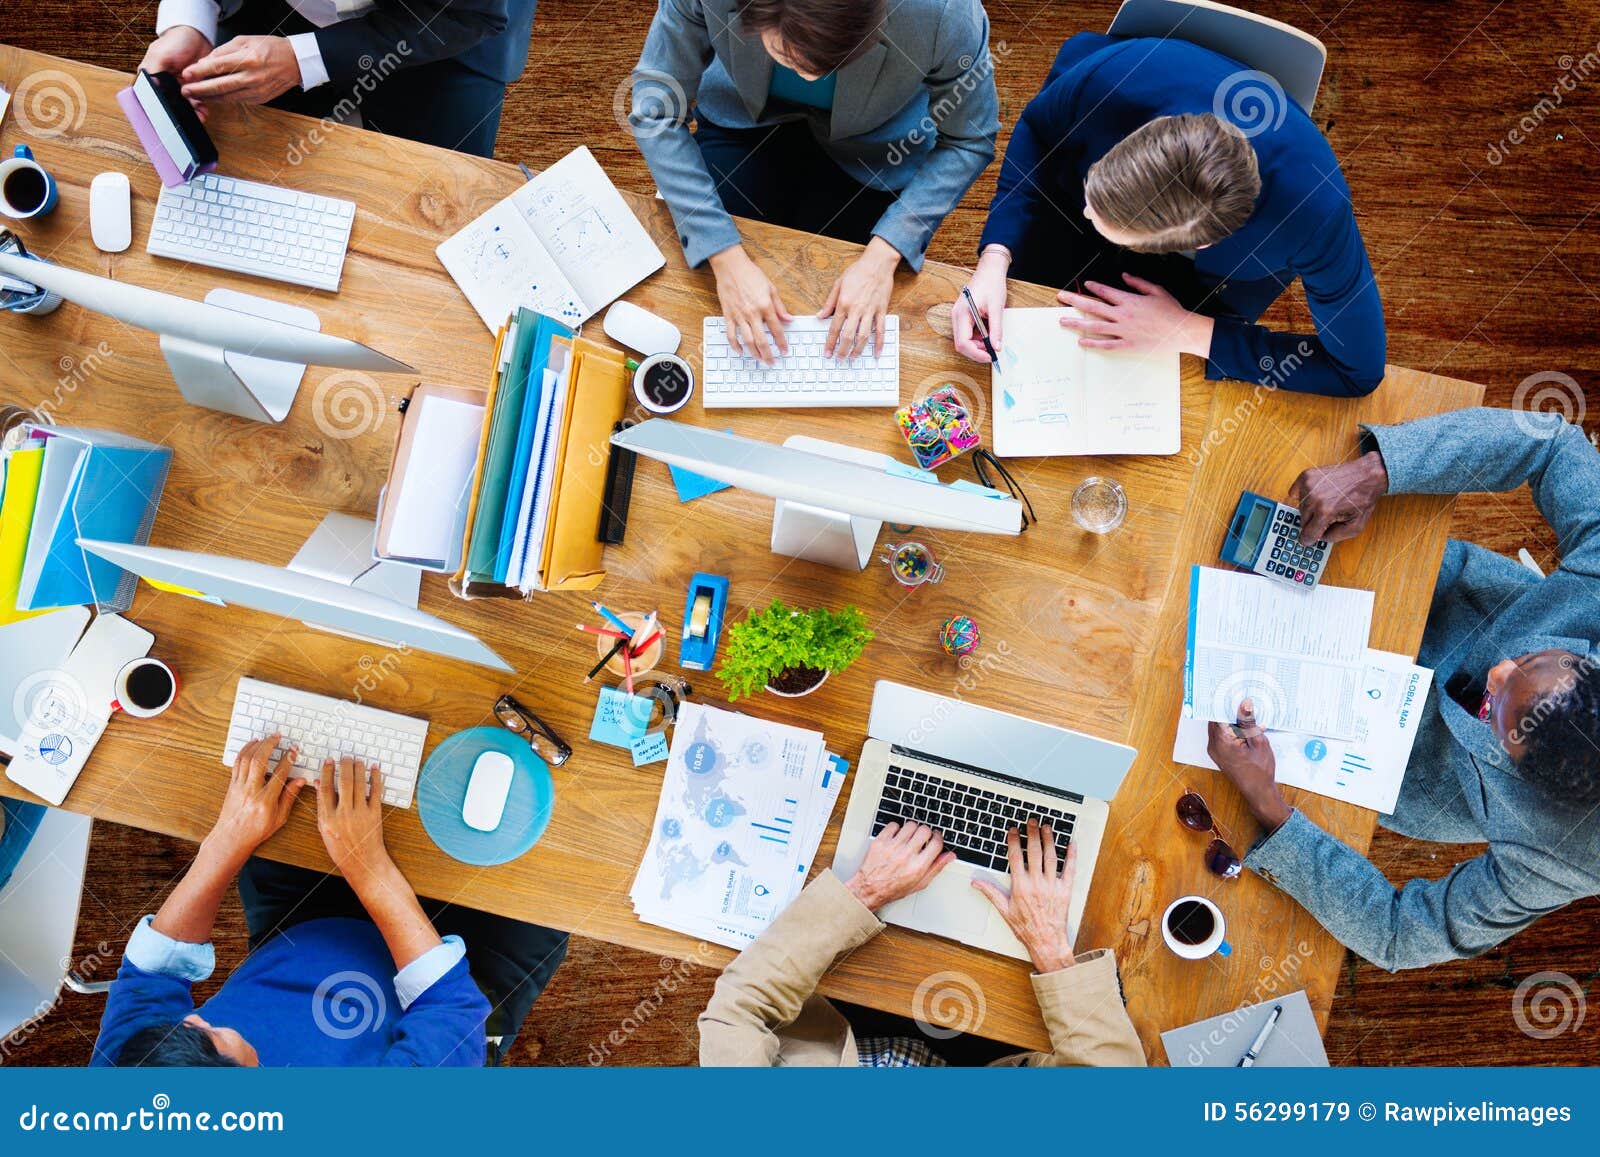 business people working office corporate team concept